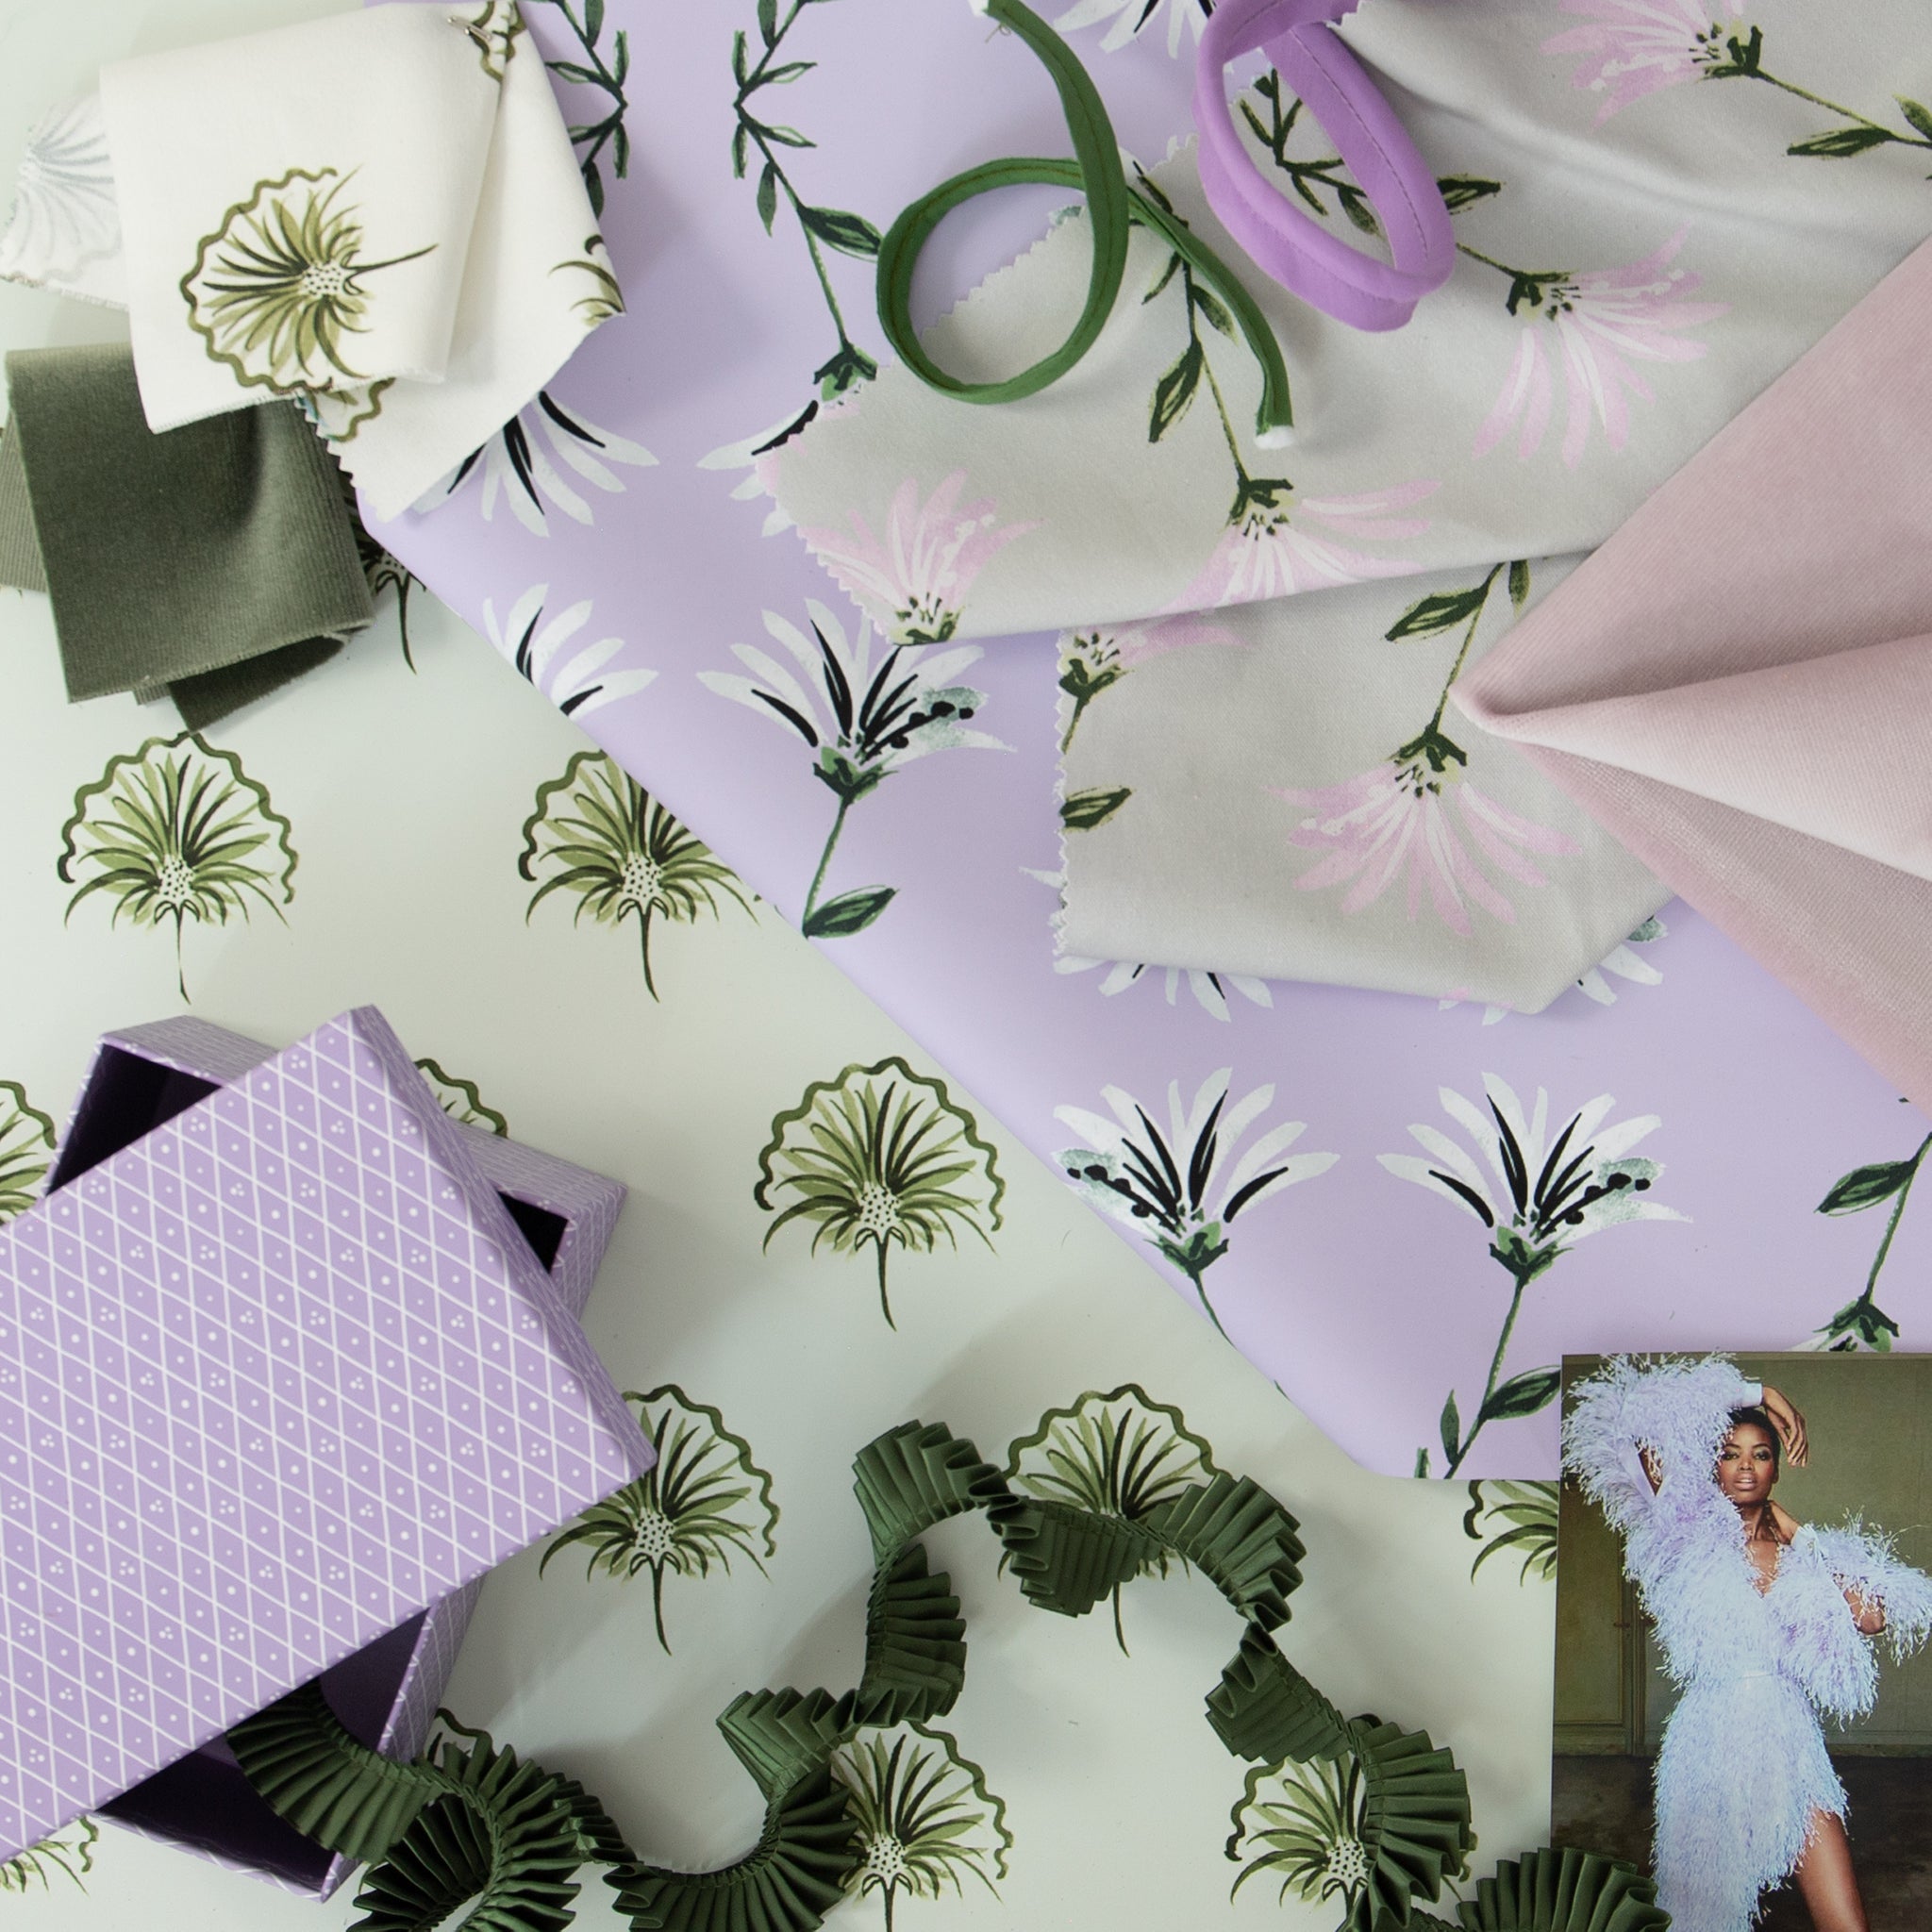 Interior design moodboard and fabric inspirations with Fern Velvet swatch, Lavender Floral printed swatch, and Green Floral printed cotton swatch